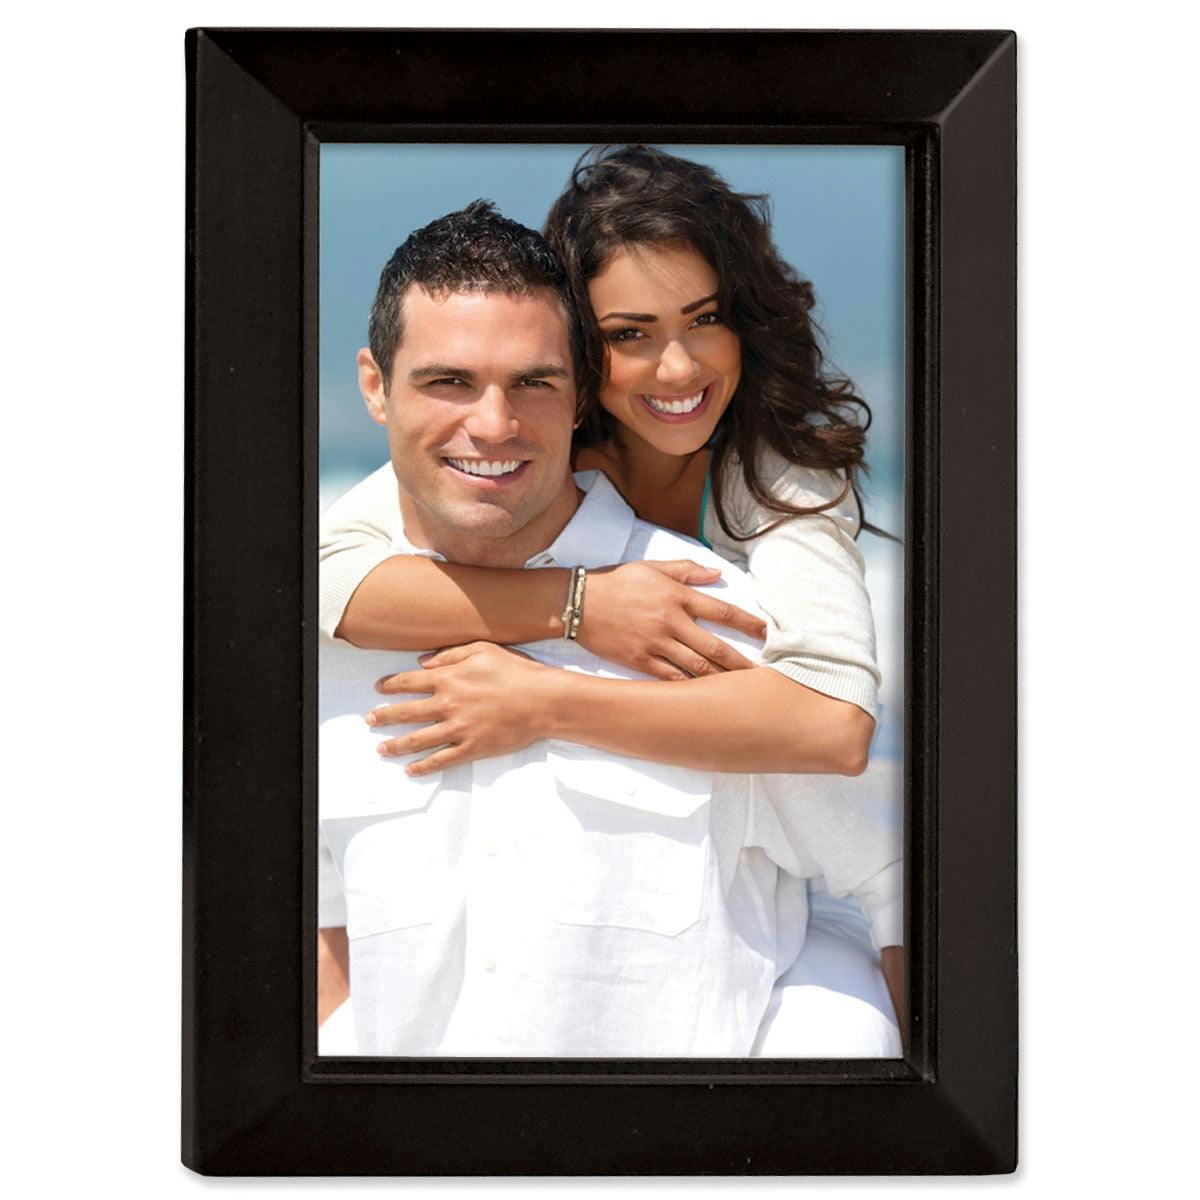 Classic Black Beveled Wood 4x5 Picture Frame - Tabletop & Wall Mount